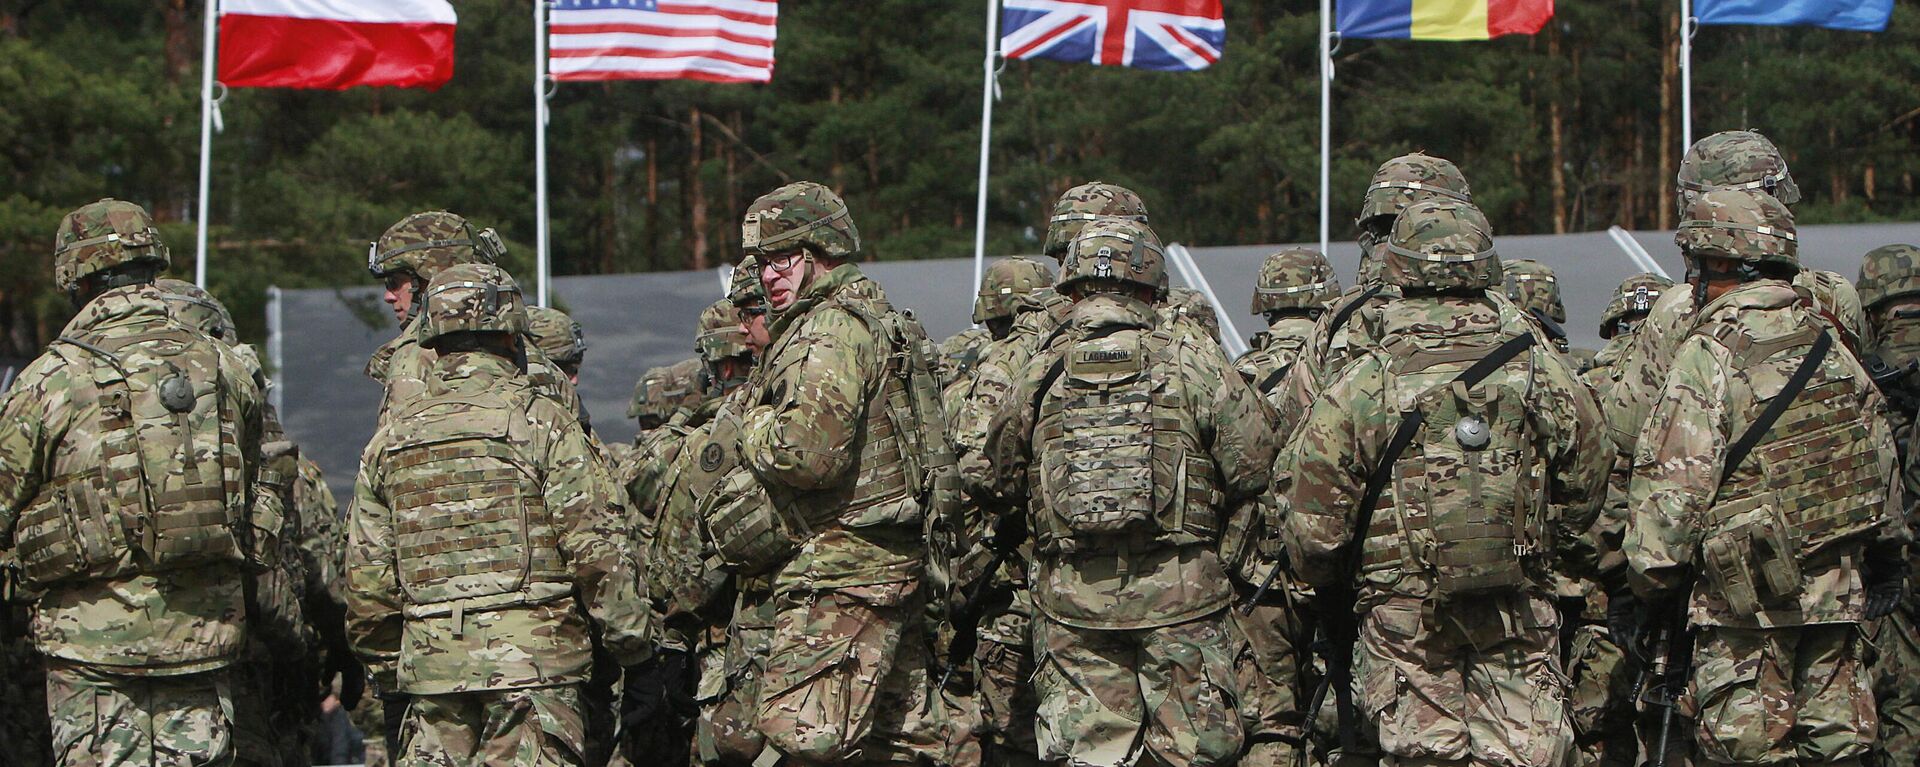 US troops, part of a NATO mission to enhance Poland's defence, are getting ready for an official welcoming ceremony in Orzysz, northeastern Poland, Thursday, April 13, 2017 - Sputnik International, 1920, 18.03.2024